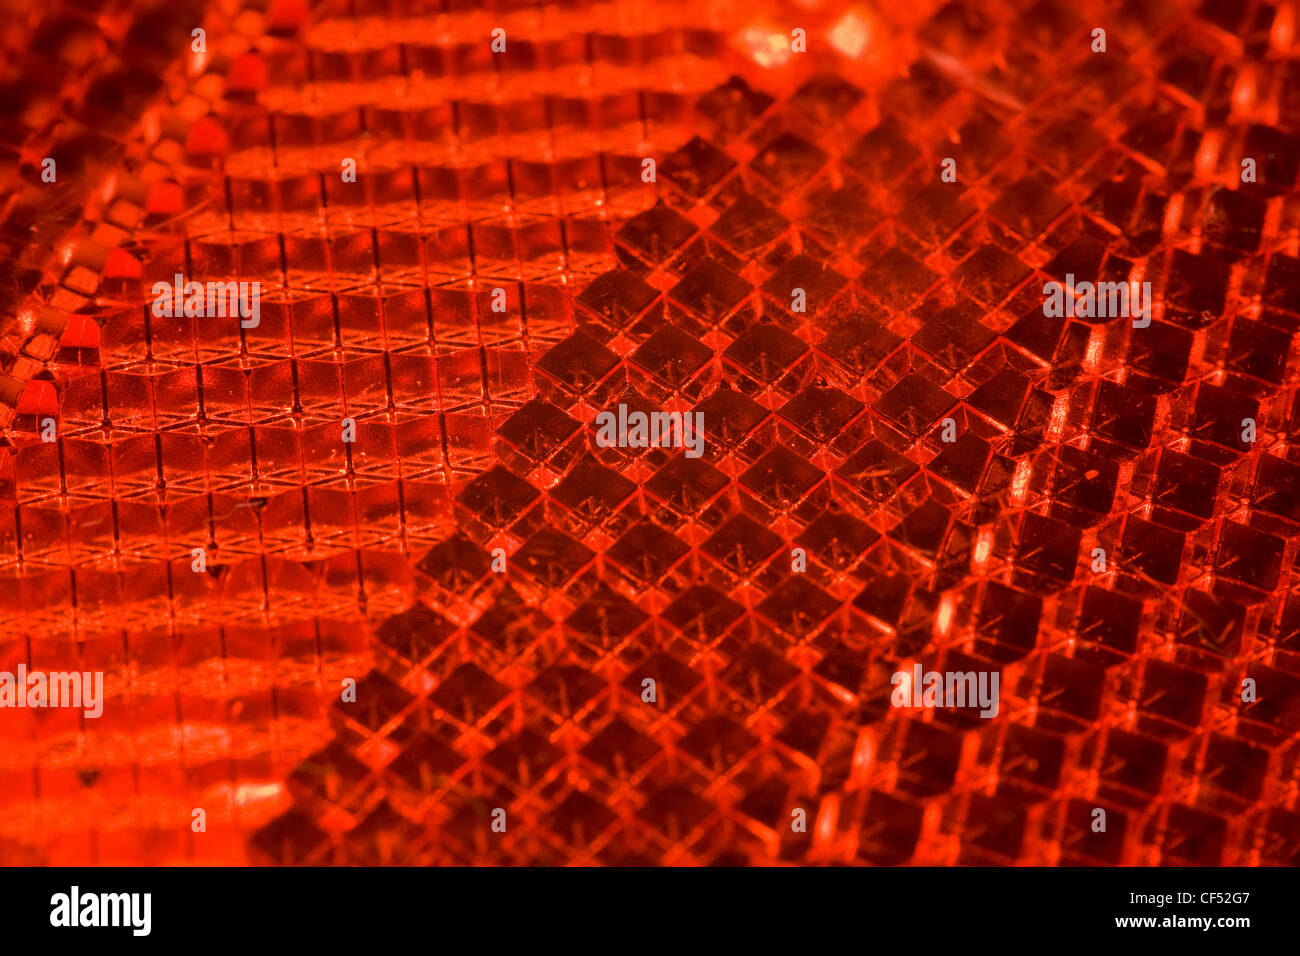 bright red abstract textural pattern, Fragment of cataphot Stock Photo